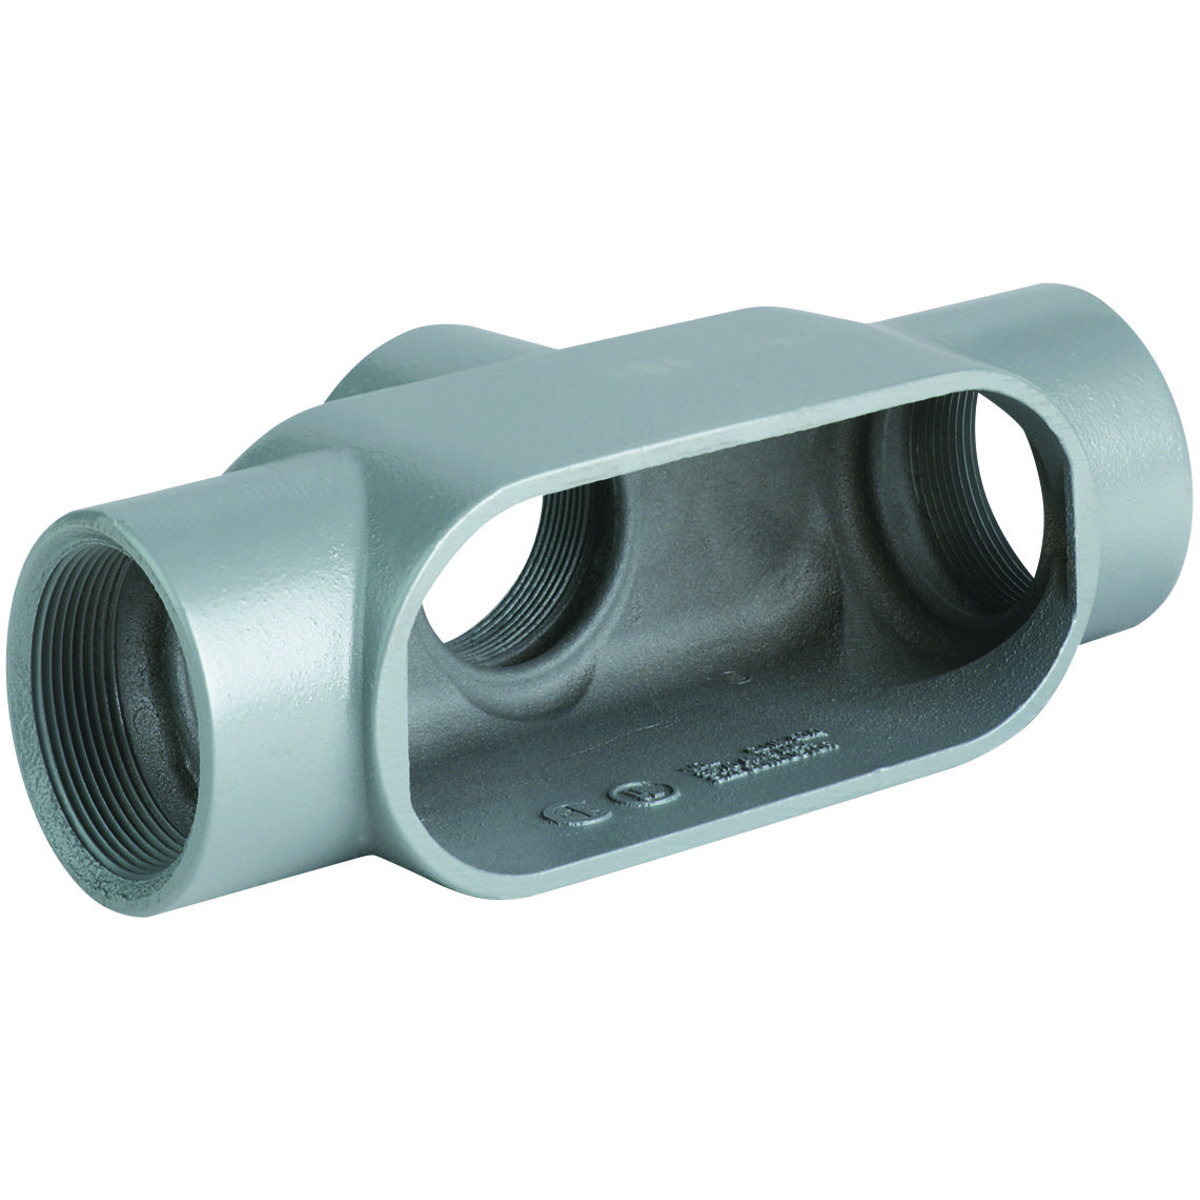 DURALOY 7 SERIES - IRON CONDUIT BODY - TB TYPE - HUB SIZE 1-1/4 INCH -VOLUME 20.0 CUBIC INCHES